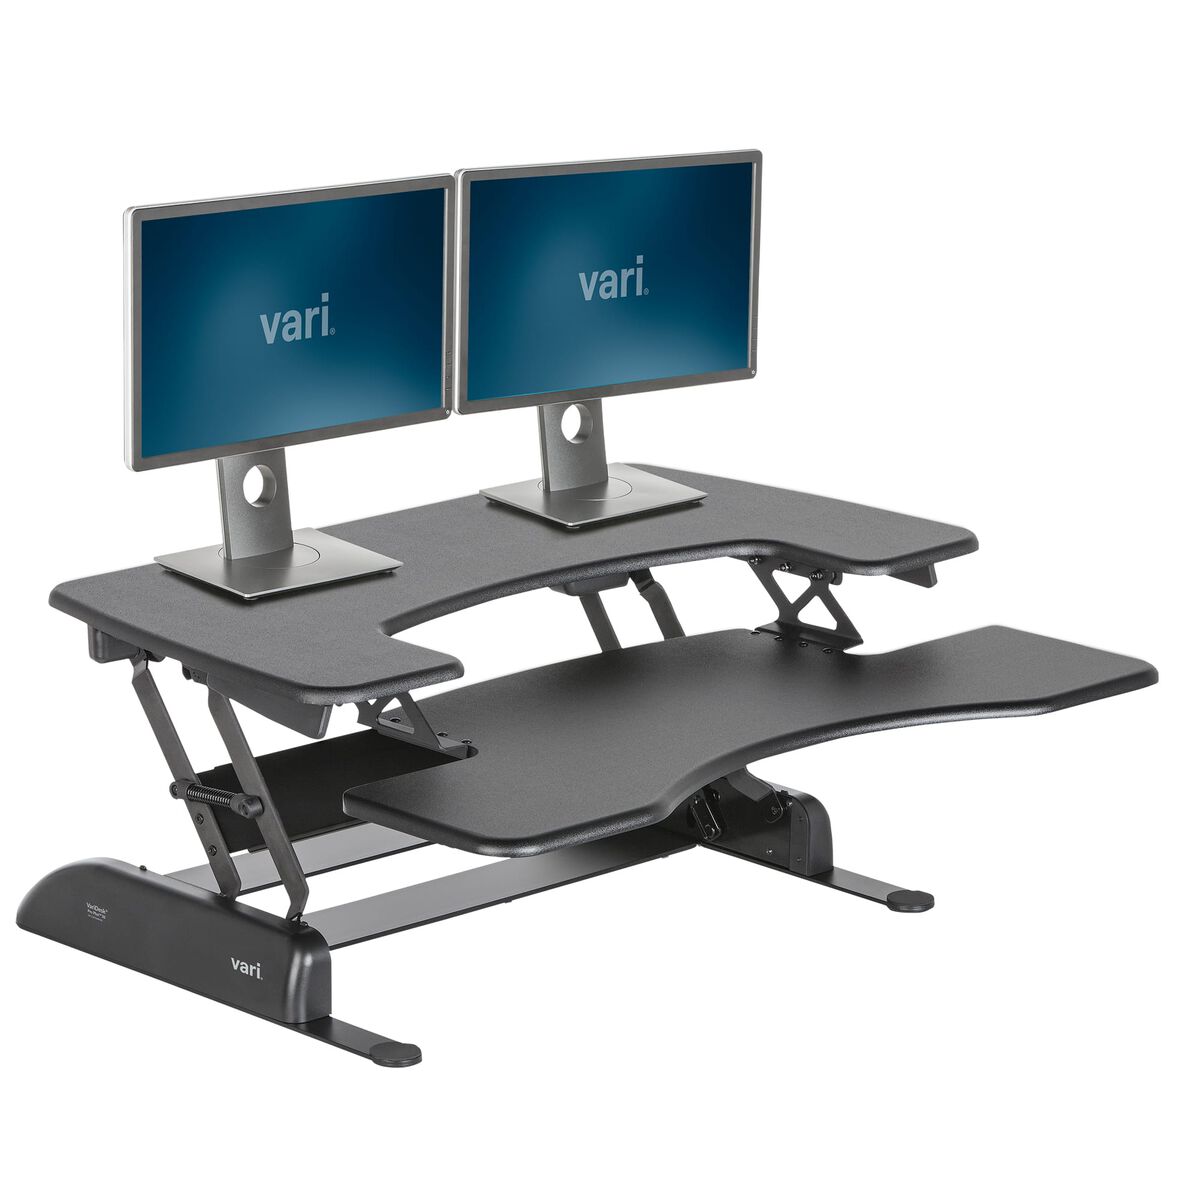 DT2 Standing Desk in Dark Wood  Height Adjustable Heavy Duty sit to stand  office desk. Supports up to 50 Lbs 35 Wide Sit Stand up Desk Converter